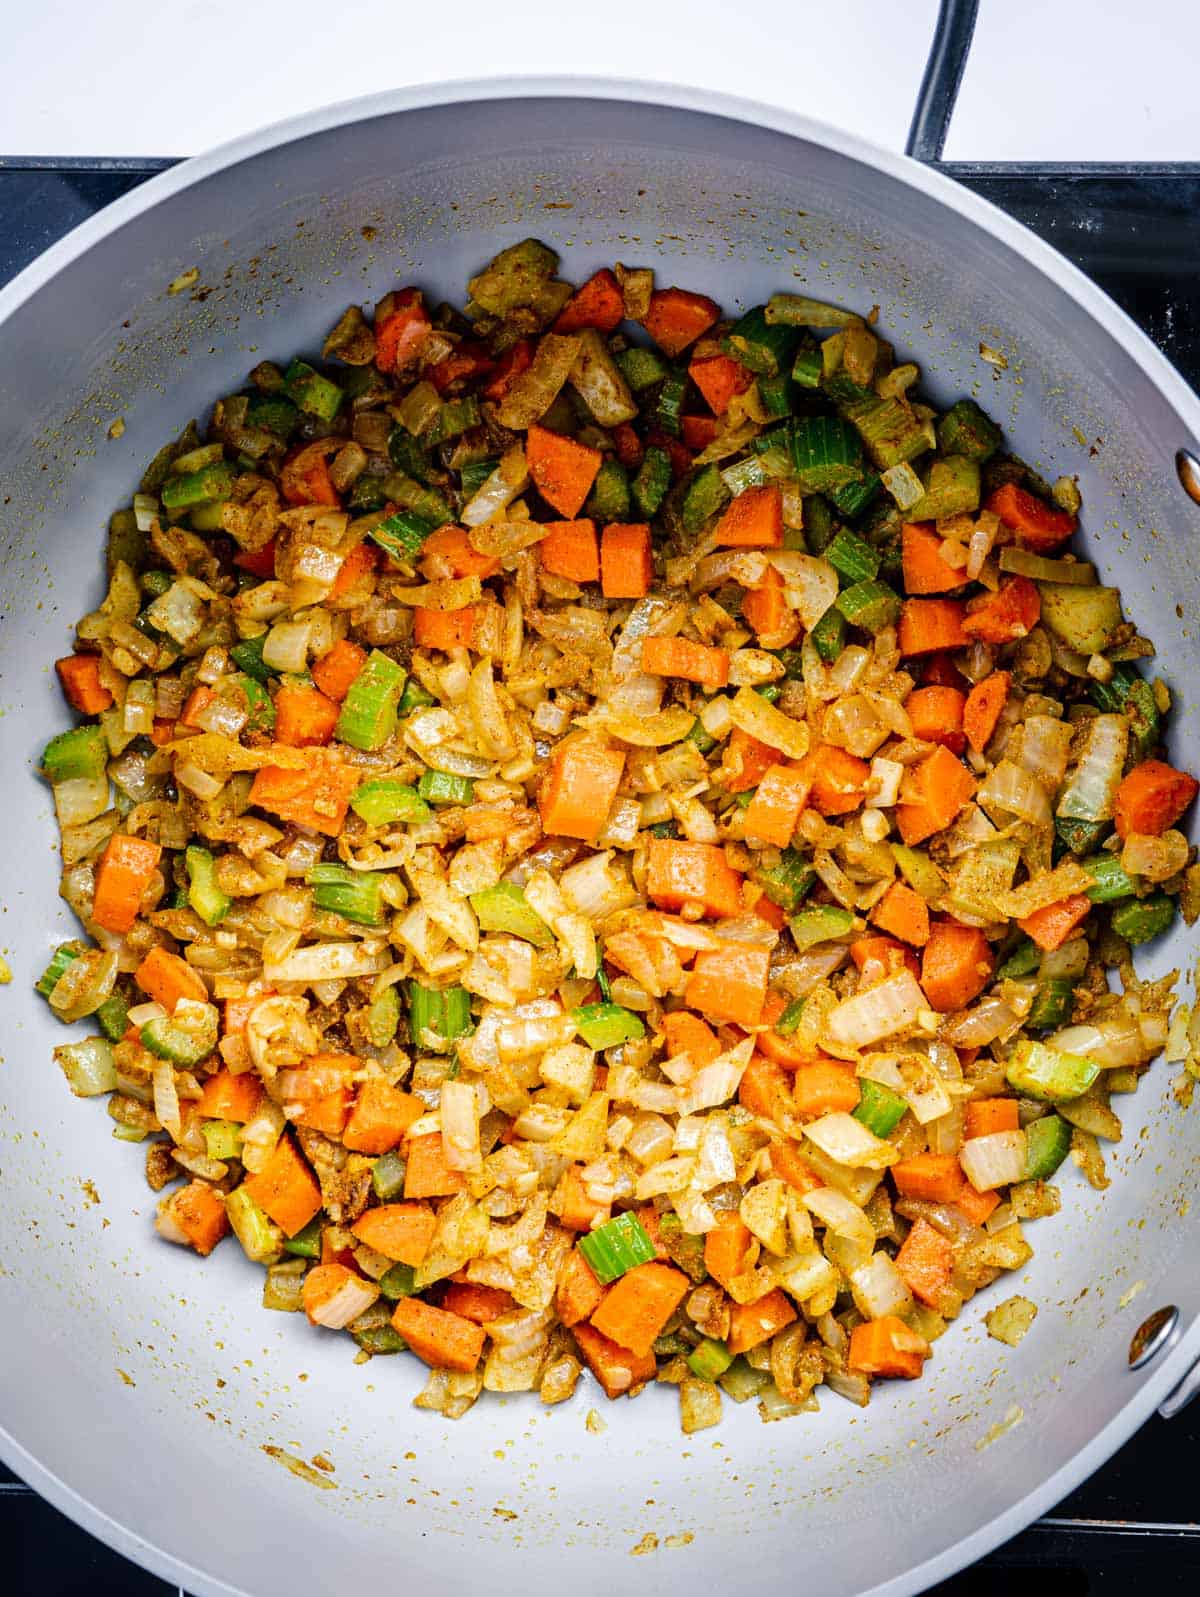 mirepoix mixed with warming spices.